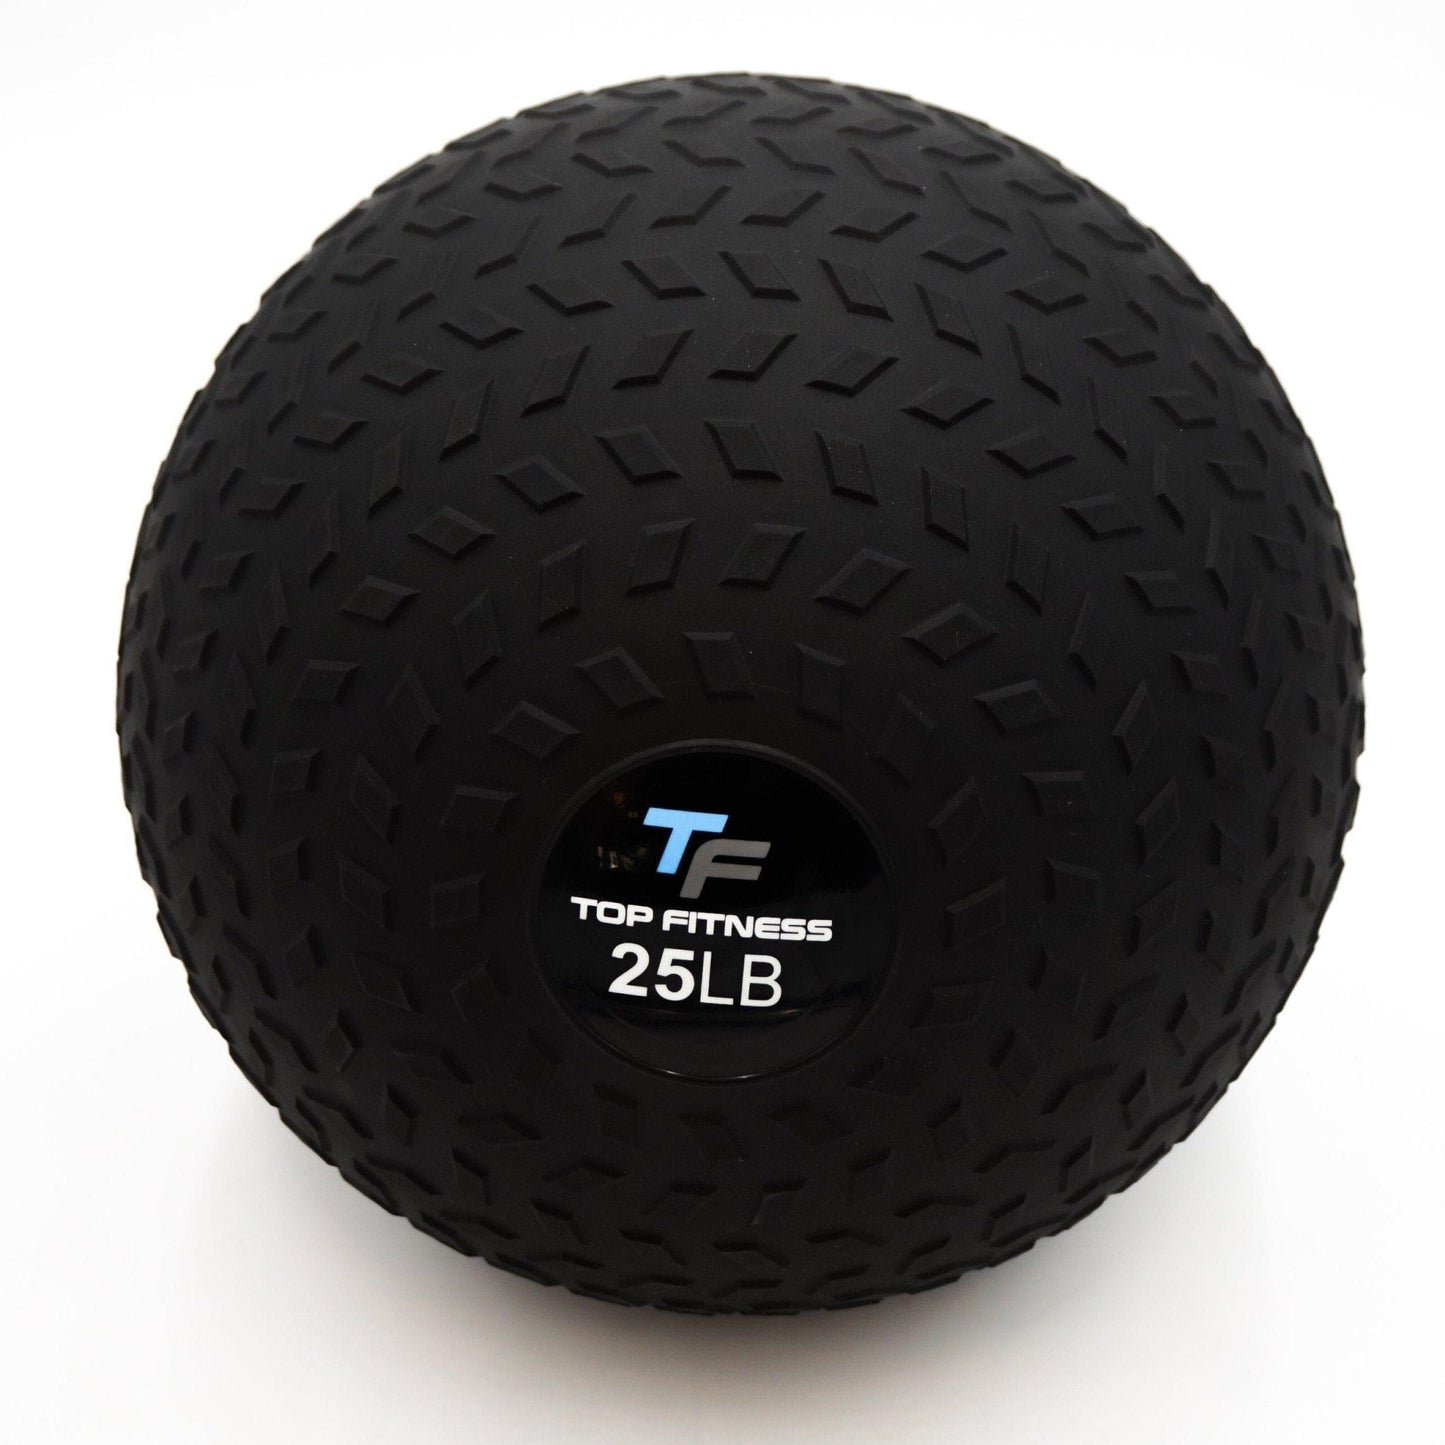 Top Fitness Slam Ball Weighted Resistance Top Fitness 25lb